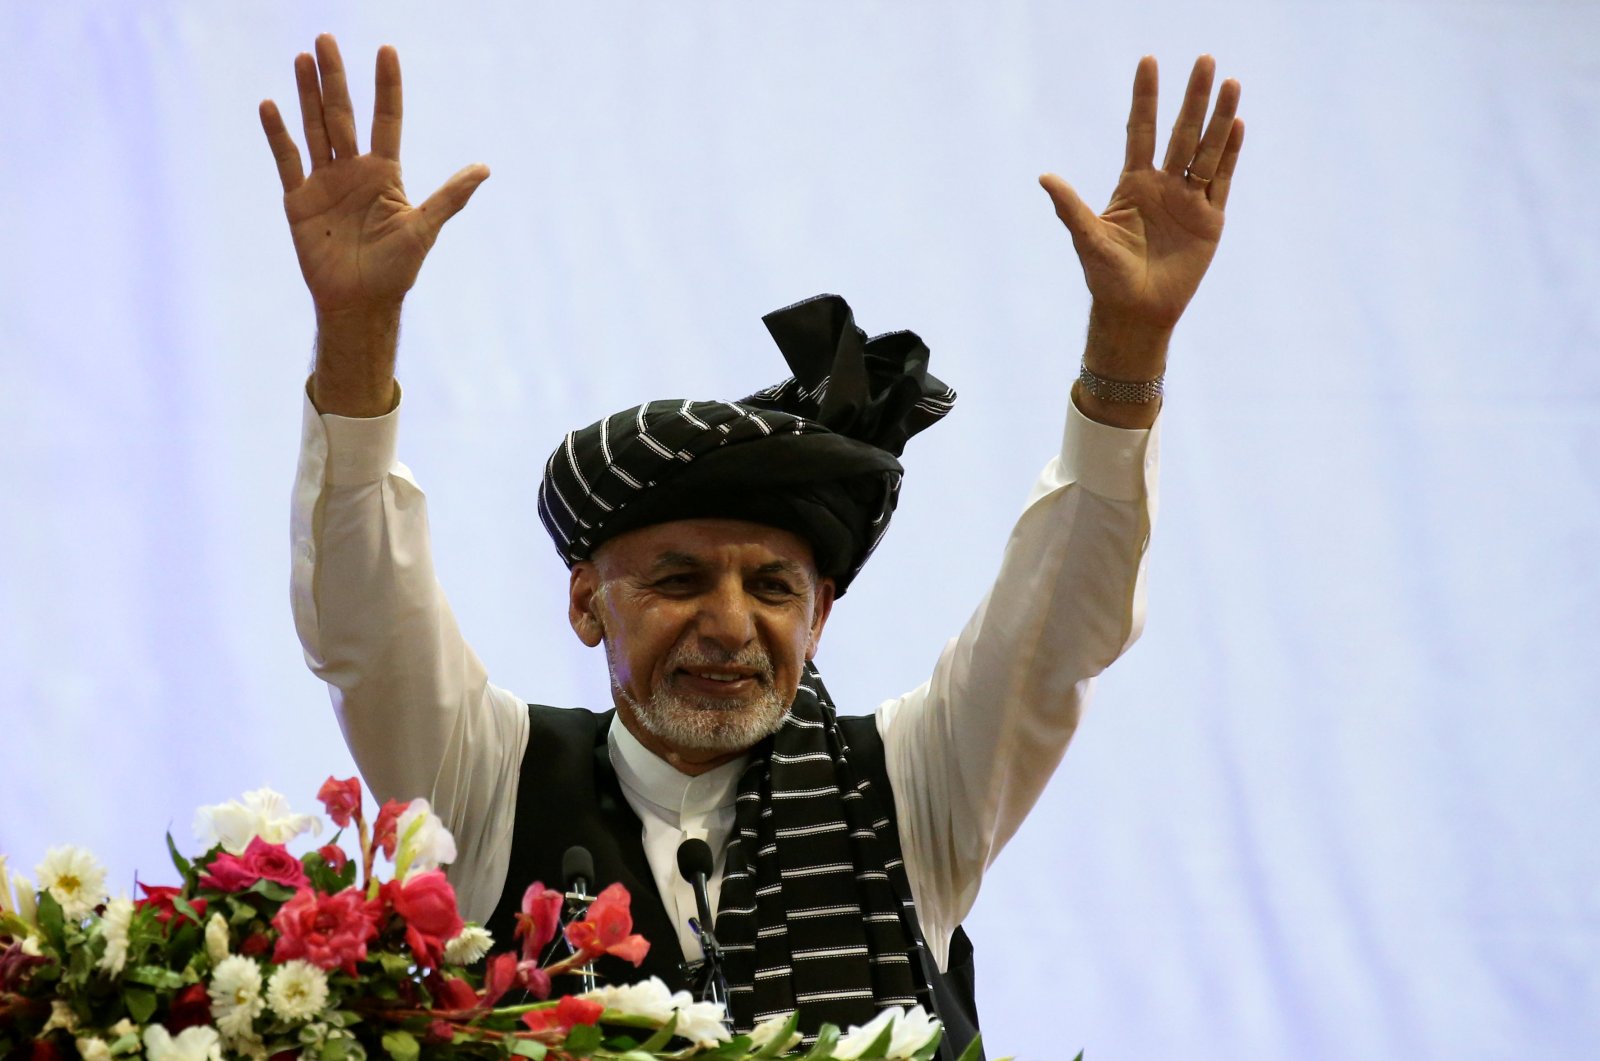 Afghan presidential candidate Ashraf Ghani gestures during his election campaign rally in Kabul, Afghanistan, Sept. 13, 2019. (Reuters Photo)